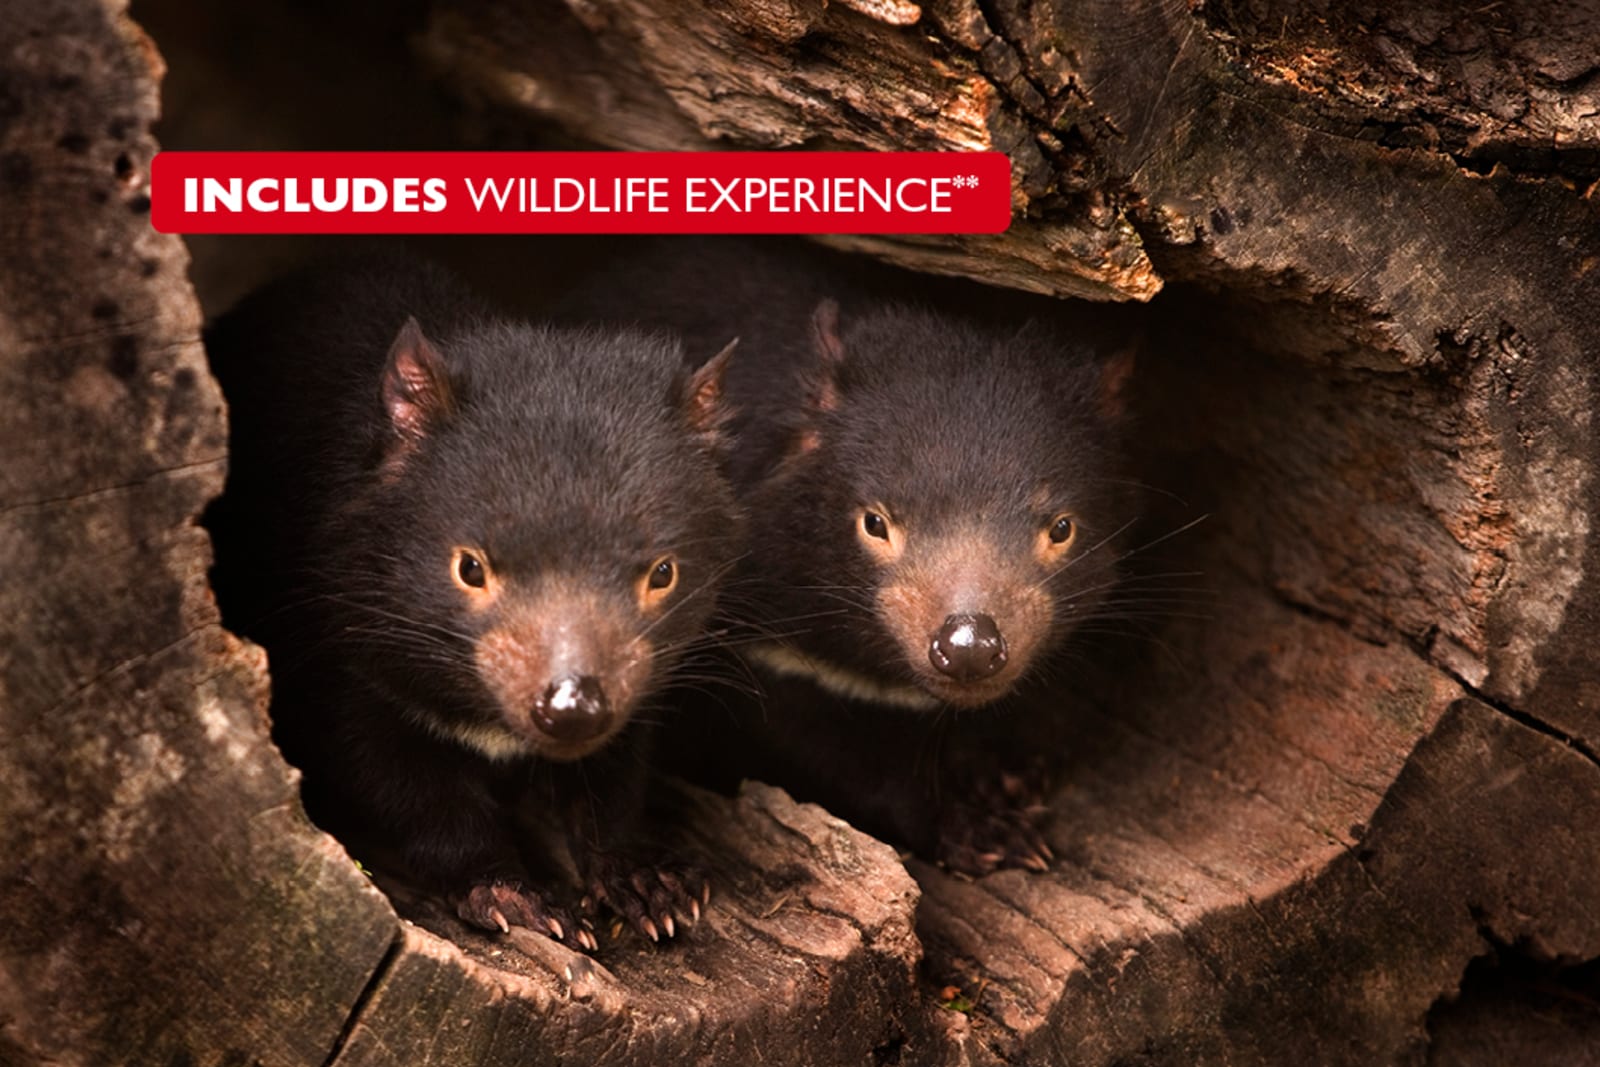 At Devils @ Cradle Wildlife Park, you have the opportunity to feed Tasmanian devils